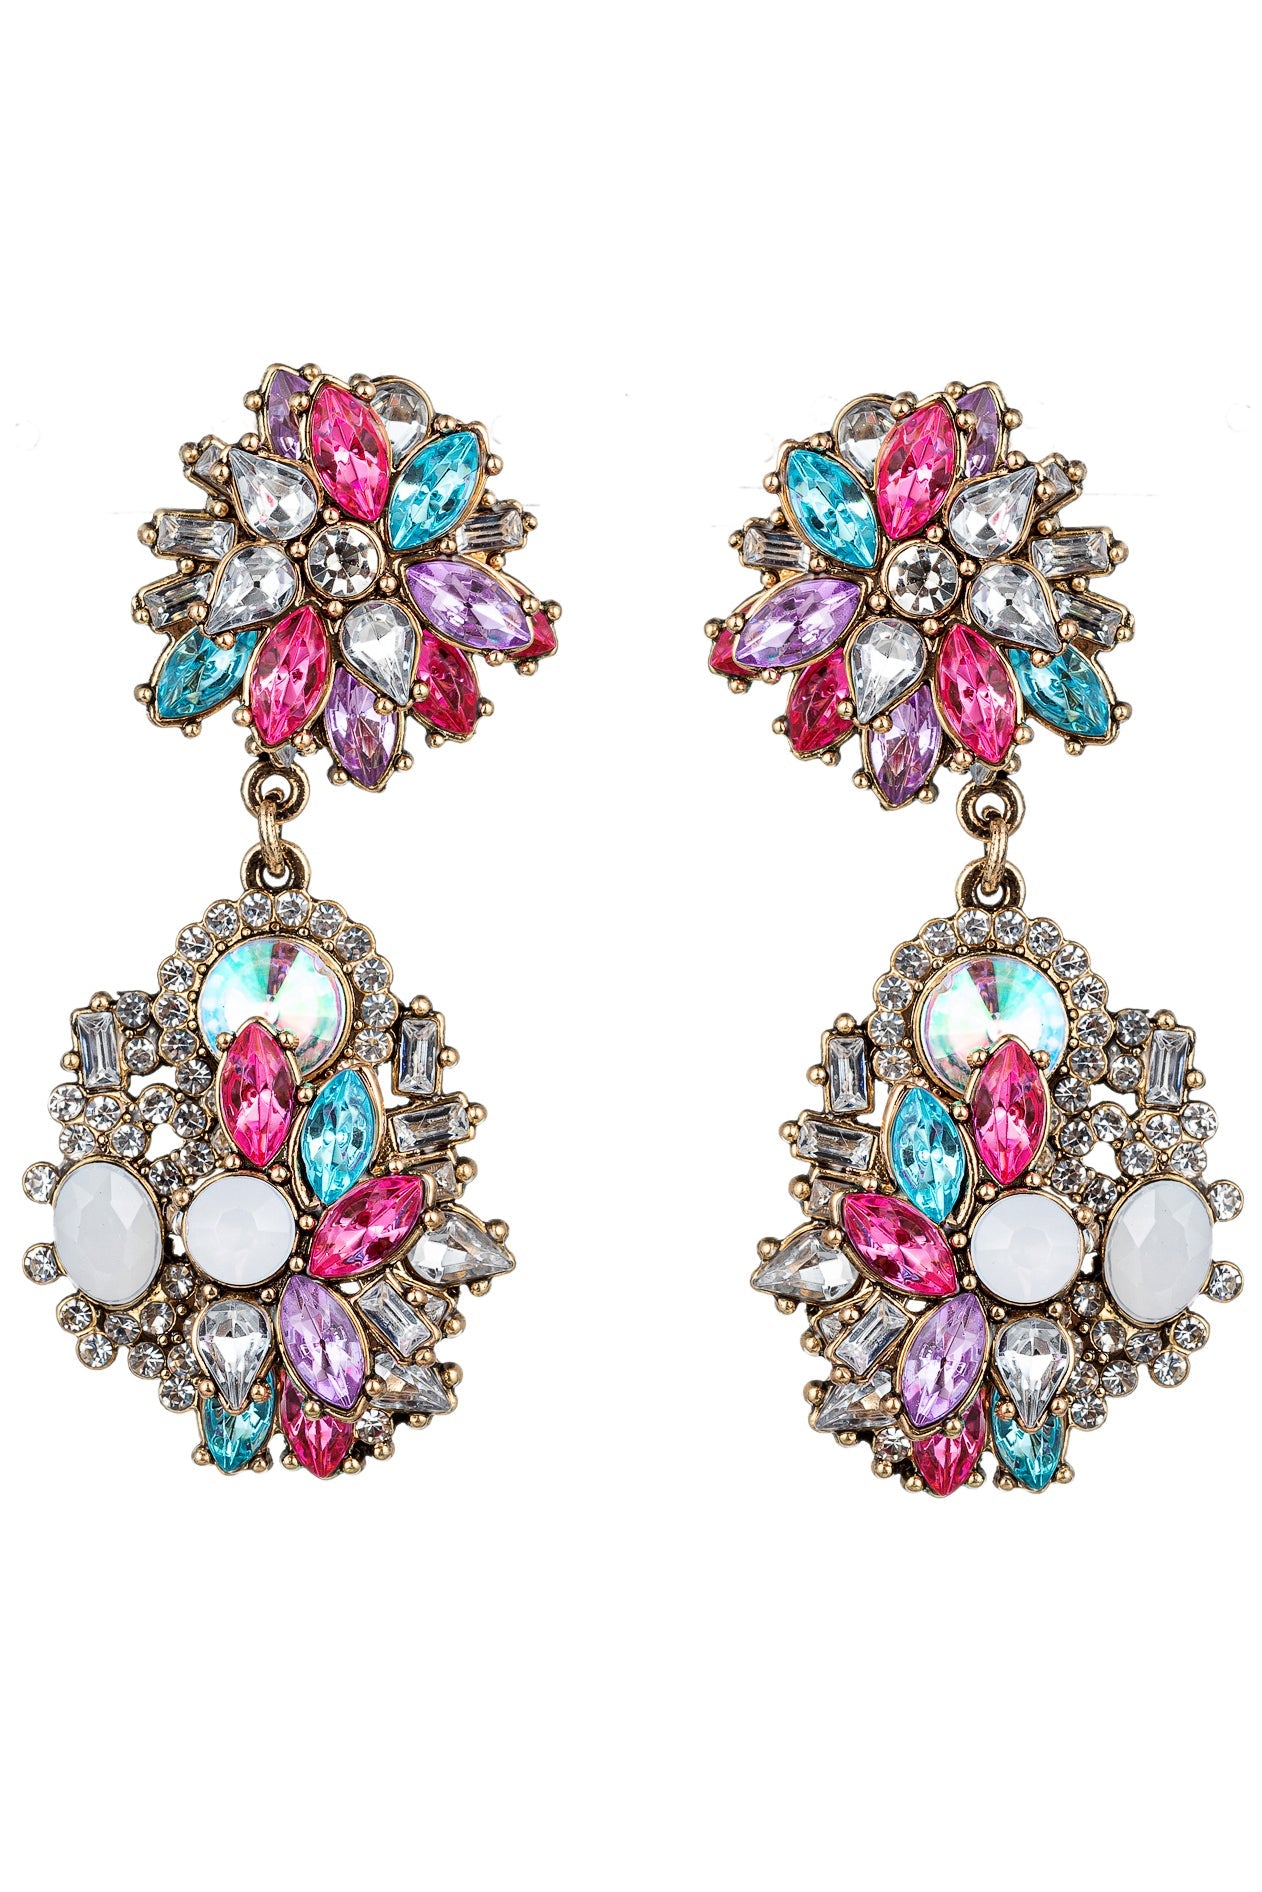 Hot Pink Statement Earrings and Rhinestones.